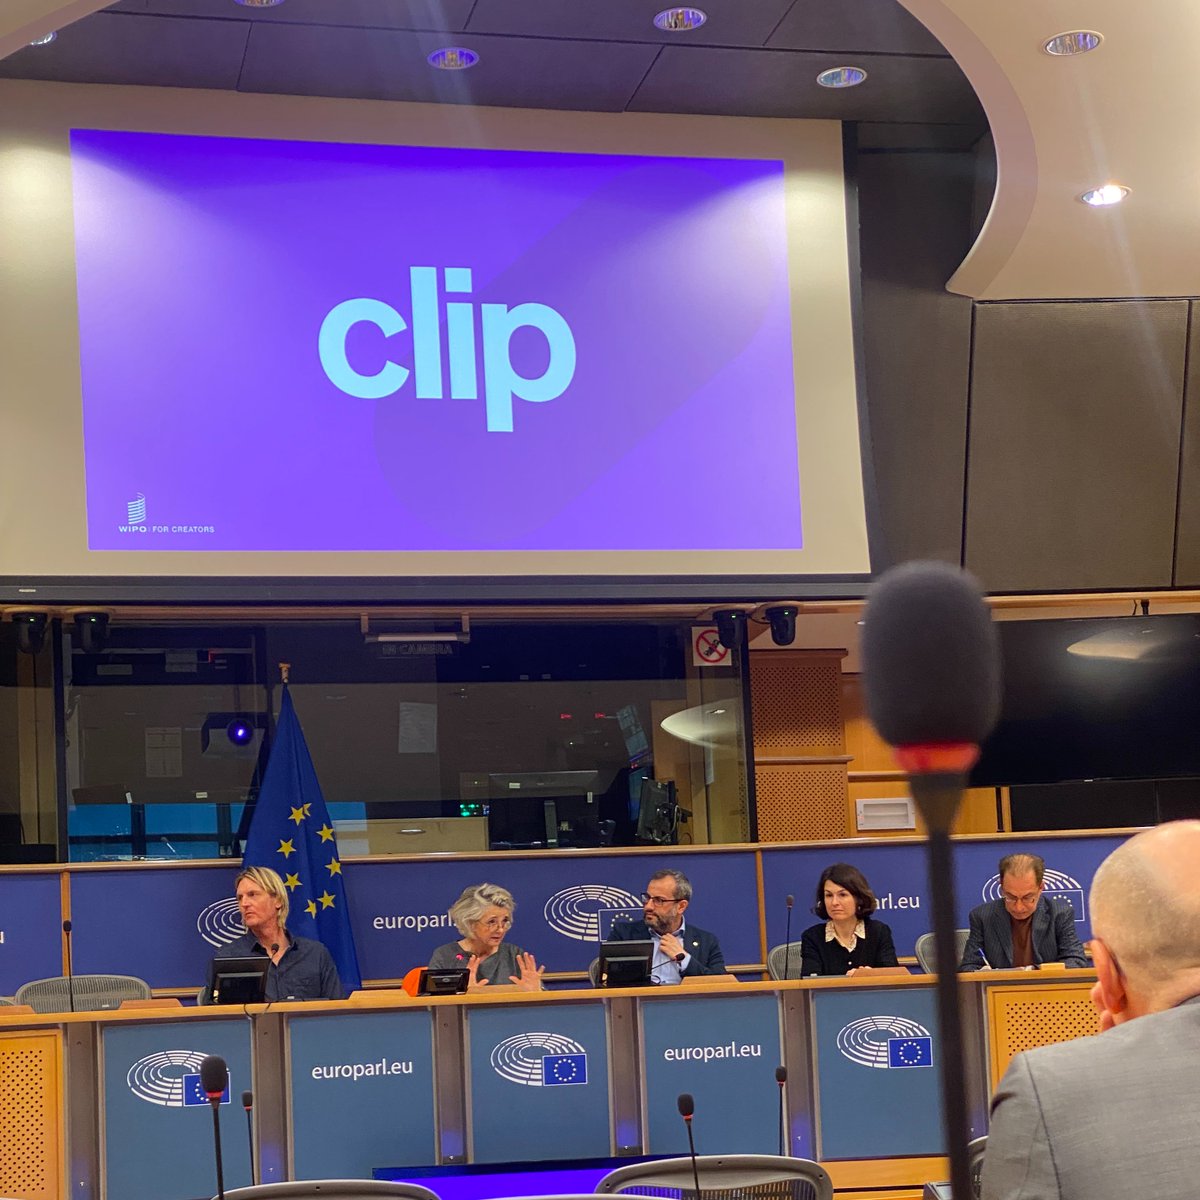 🇪🇺Today, IMPALA is at the @Europarl_EN for the presentation of the Creators Learn Intellectual Property (CLIP) platform, an initiative of the @musicrightsaw &
@WIPO. 

🙏Thank you @Ibangarciadb & @niclasmolinder for organising this event!

#goCLIPnow 
ℹ️👉goclip.org